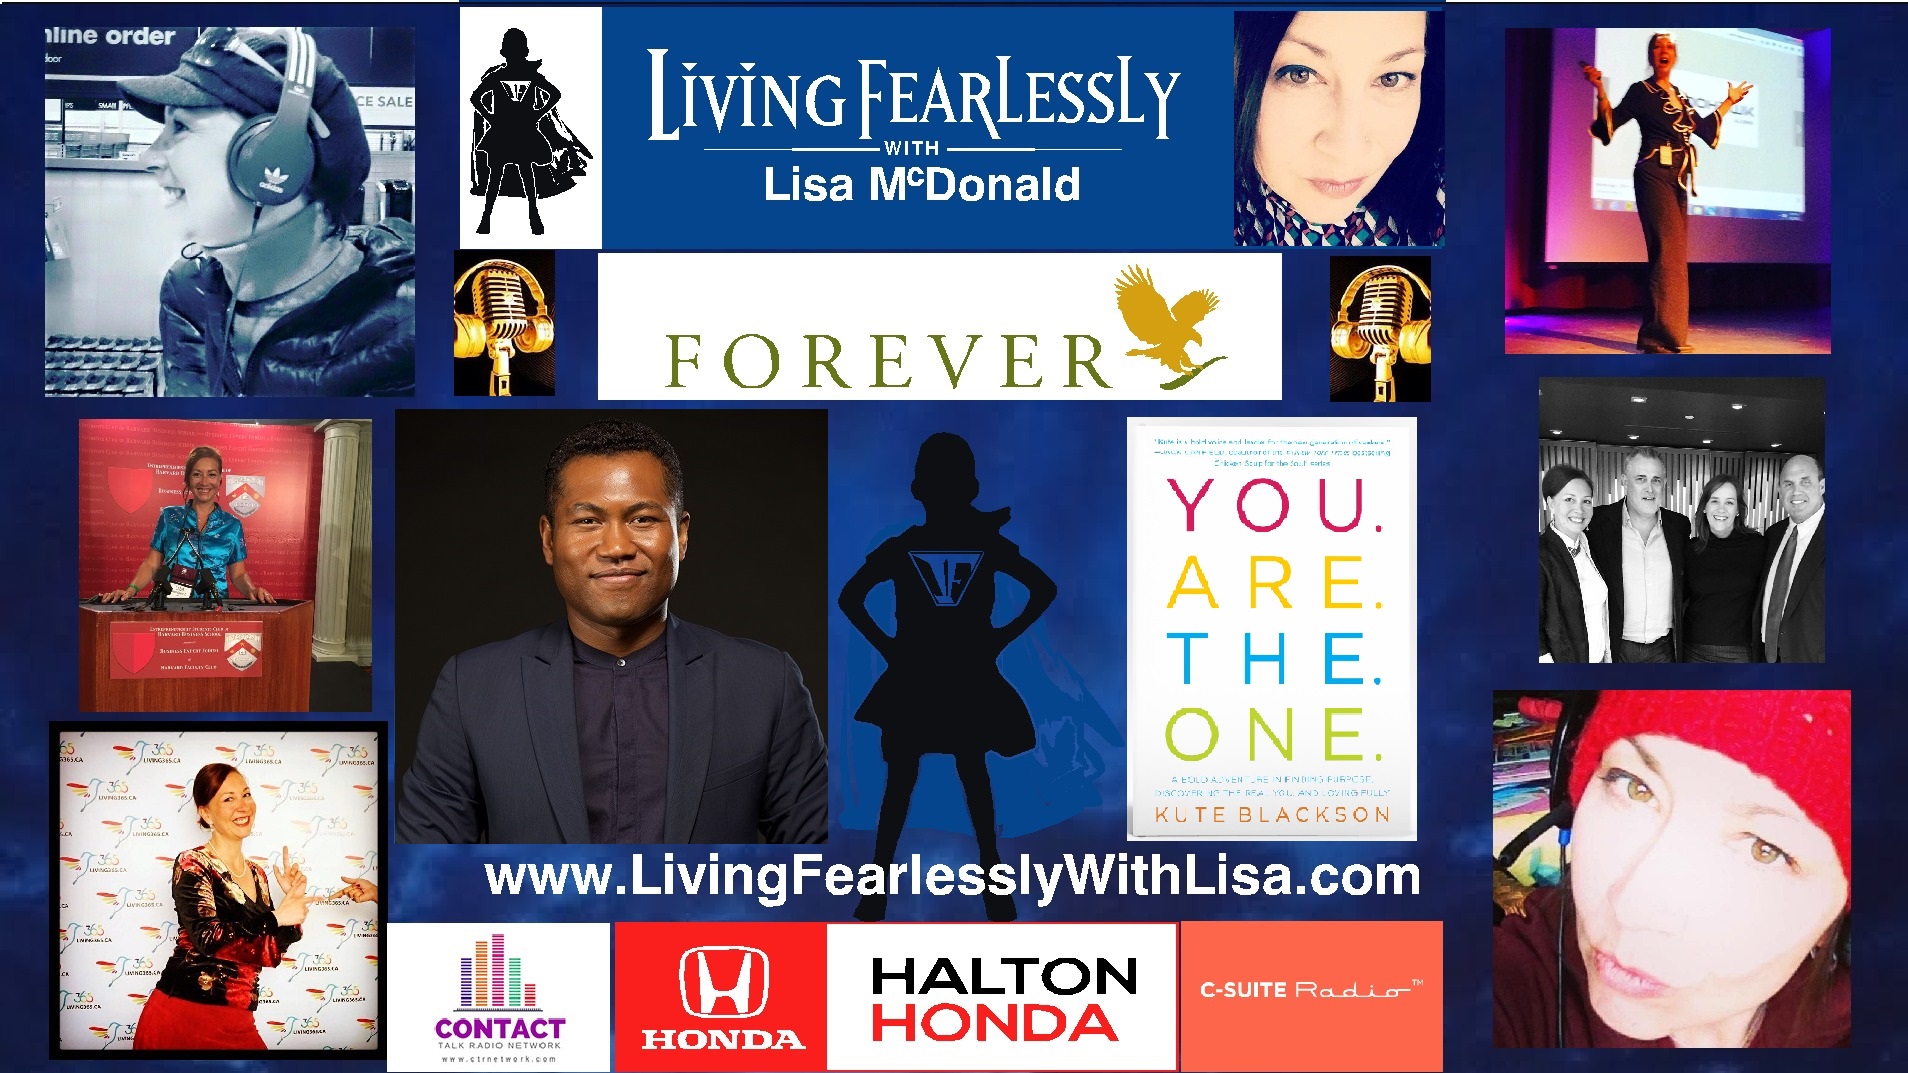 Kute Blackson on Living Fearlessly with Lisa McDonald 3-30-18